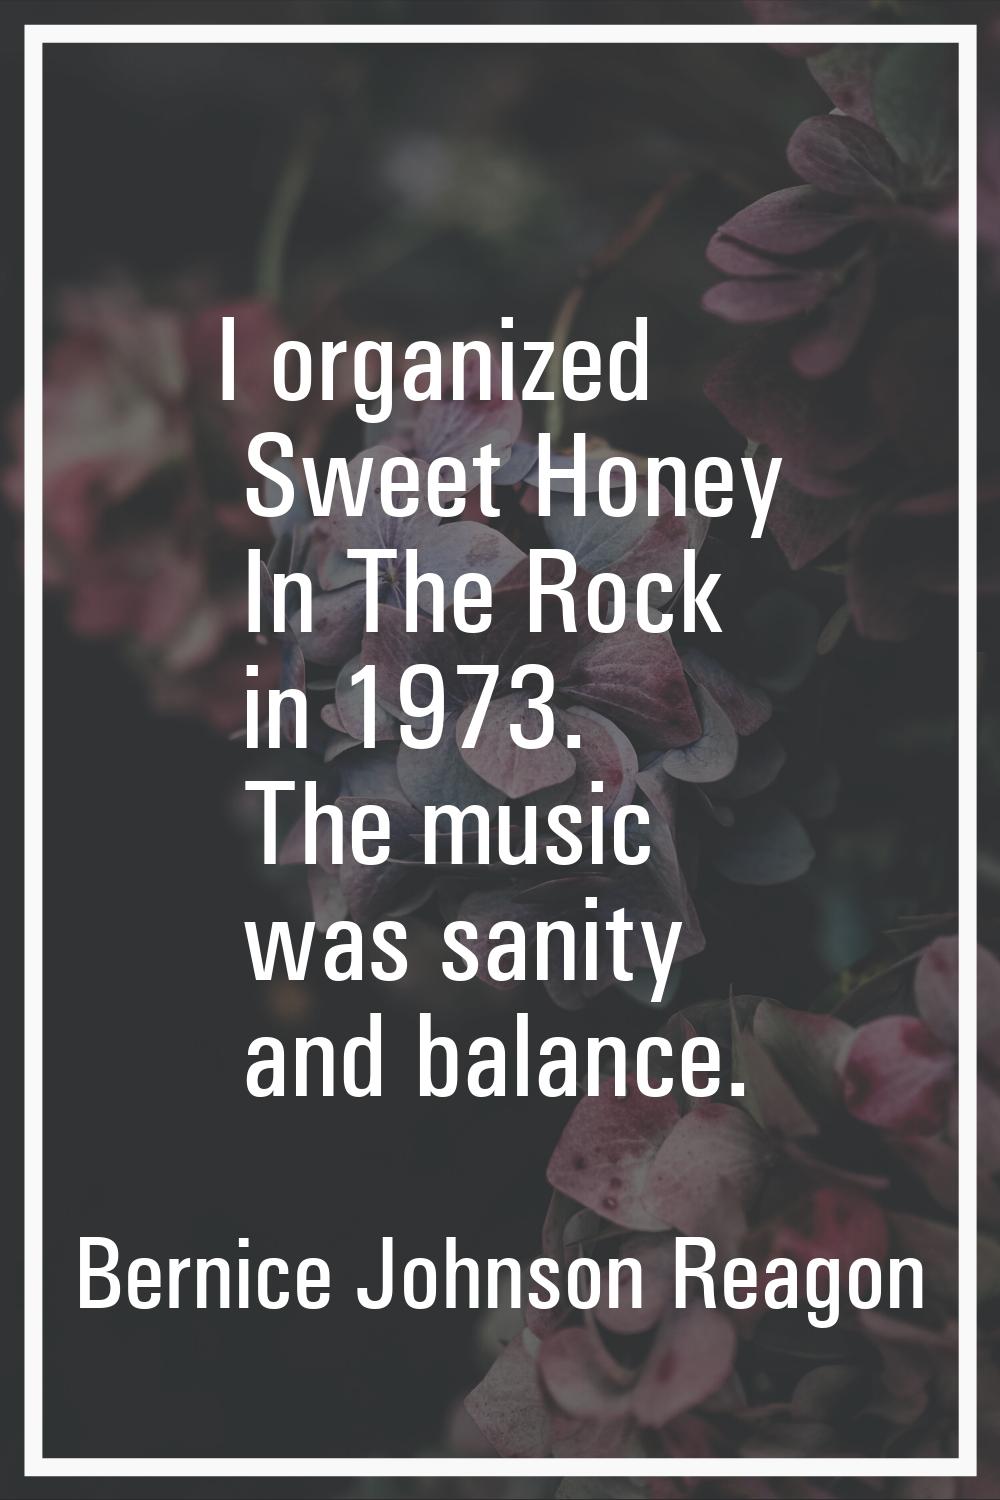 I organized Sweet Honey In The Rock in 1973. The music was sanity and balance.